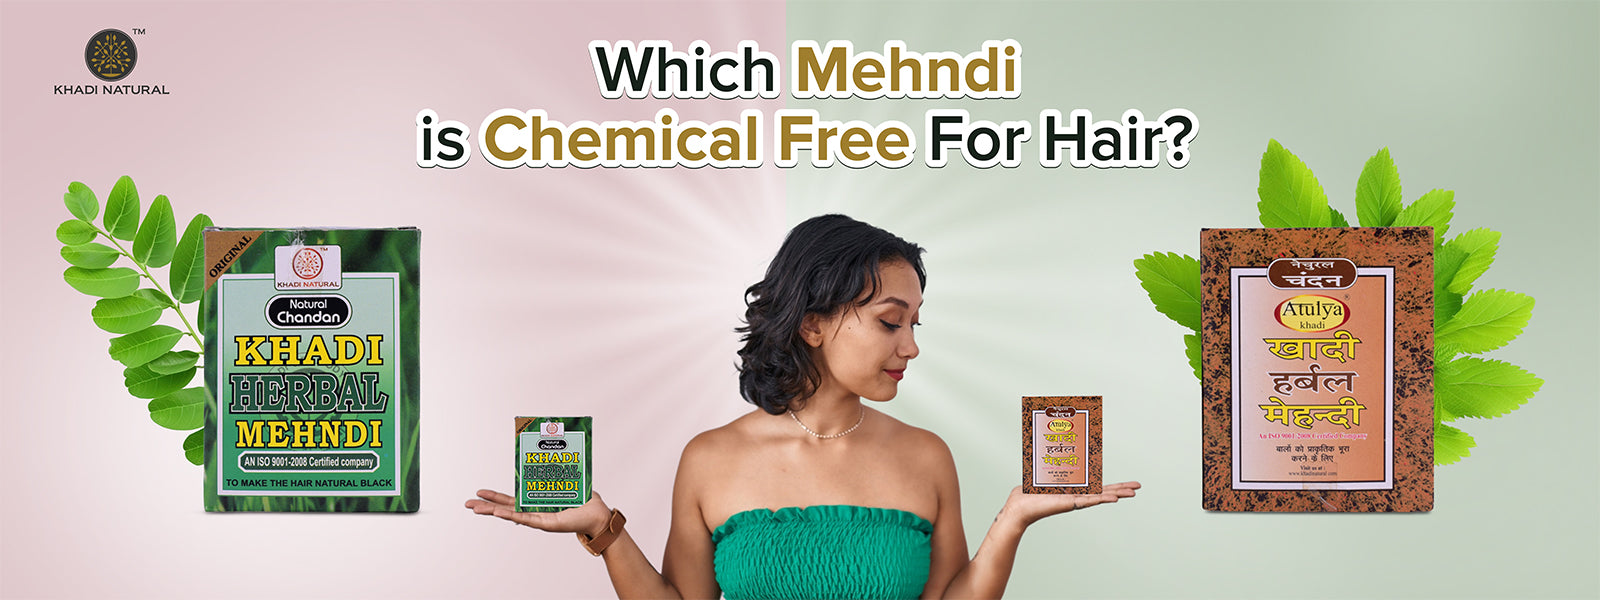 Which Mehndi is chemical free for hair?